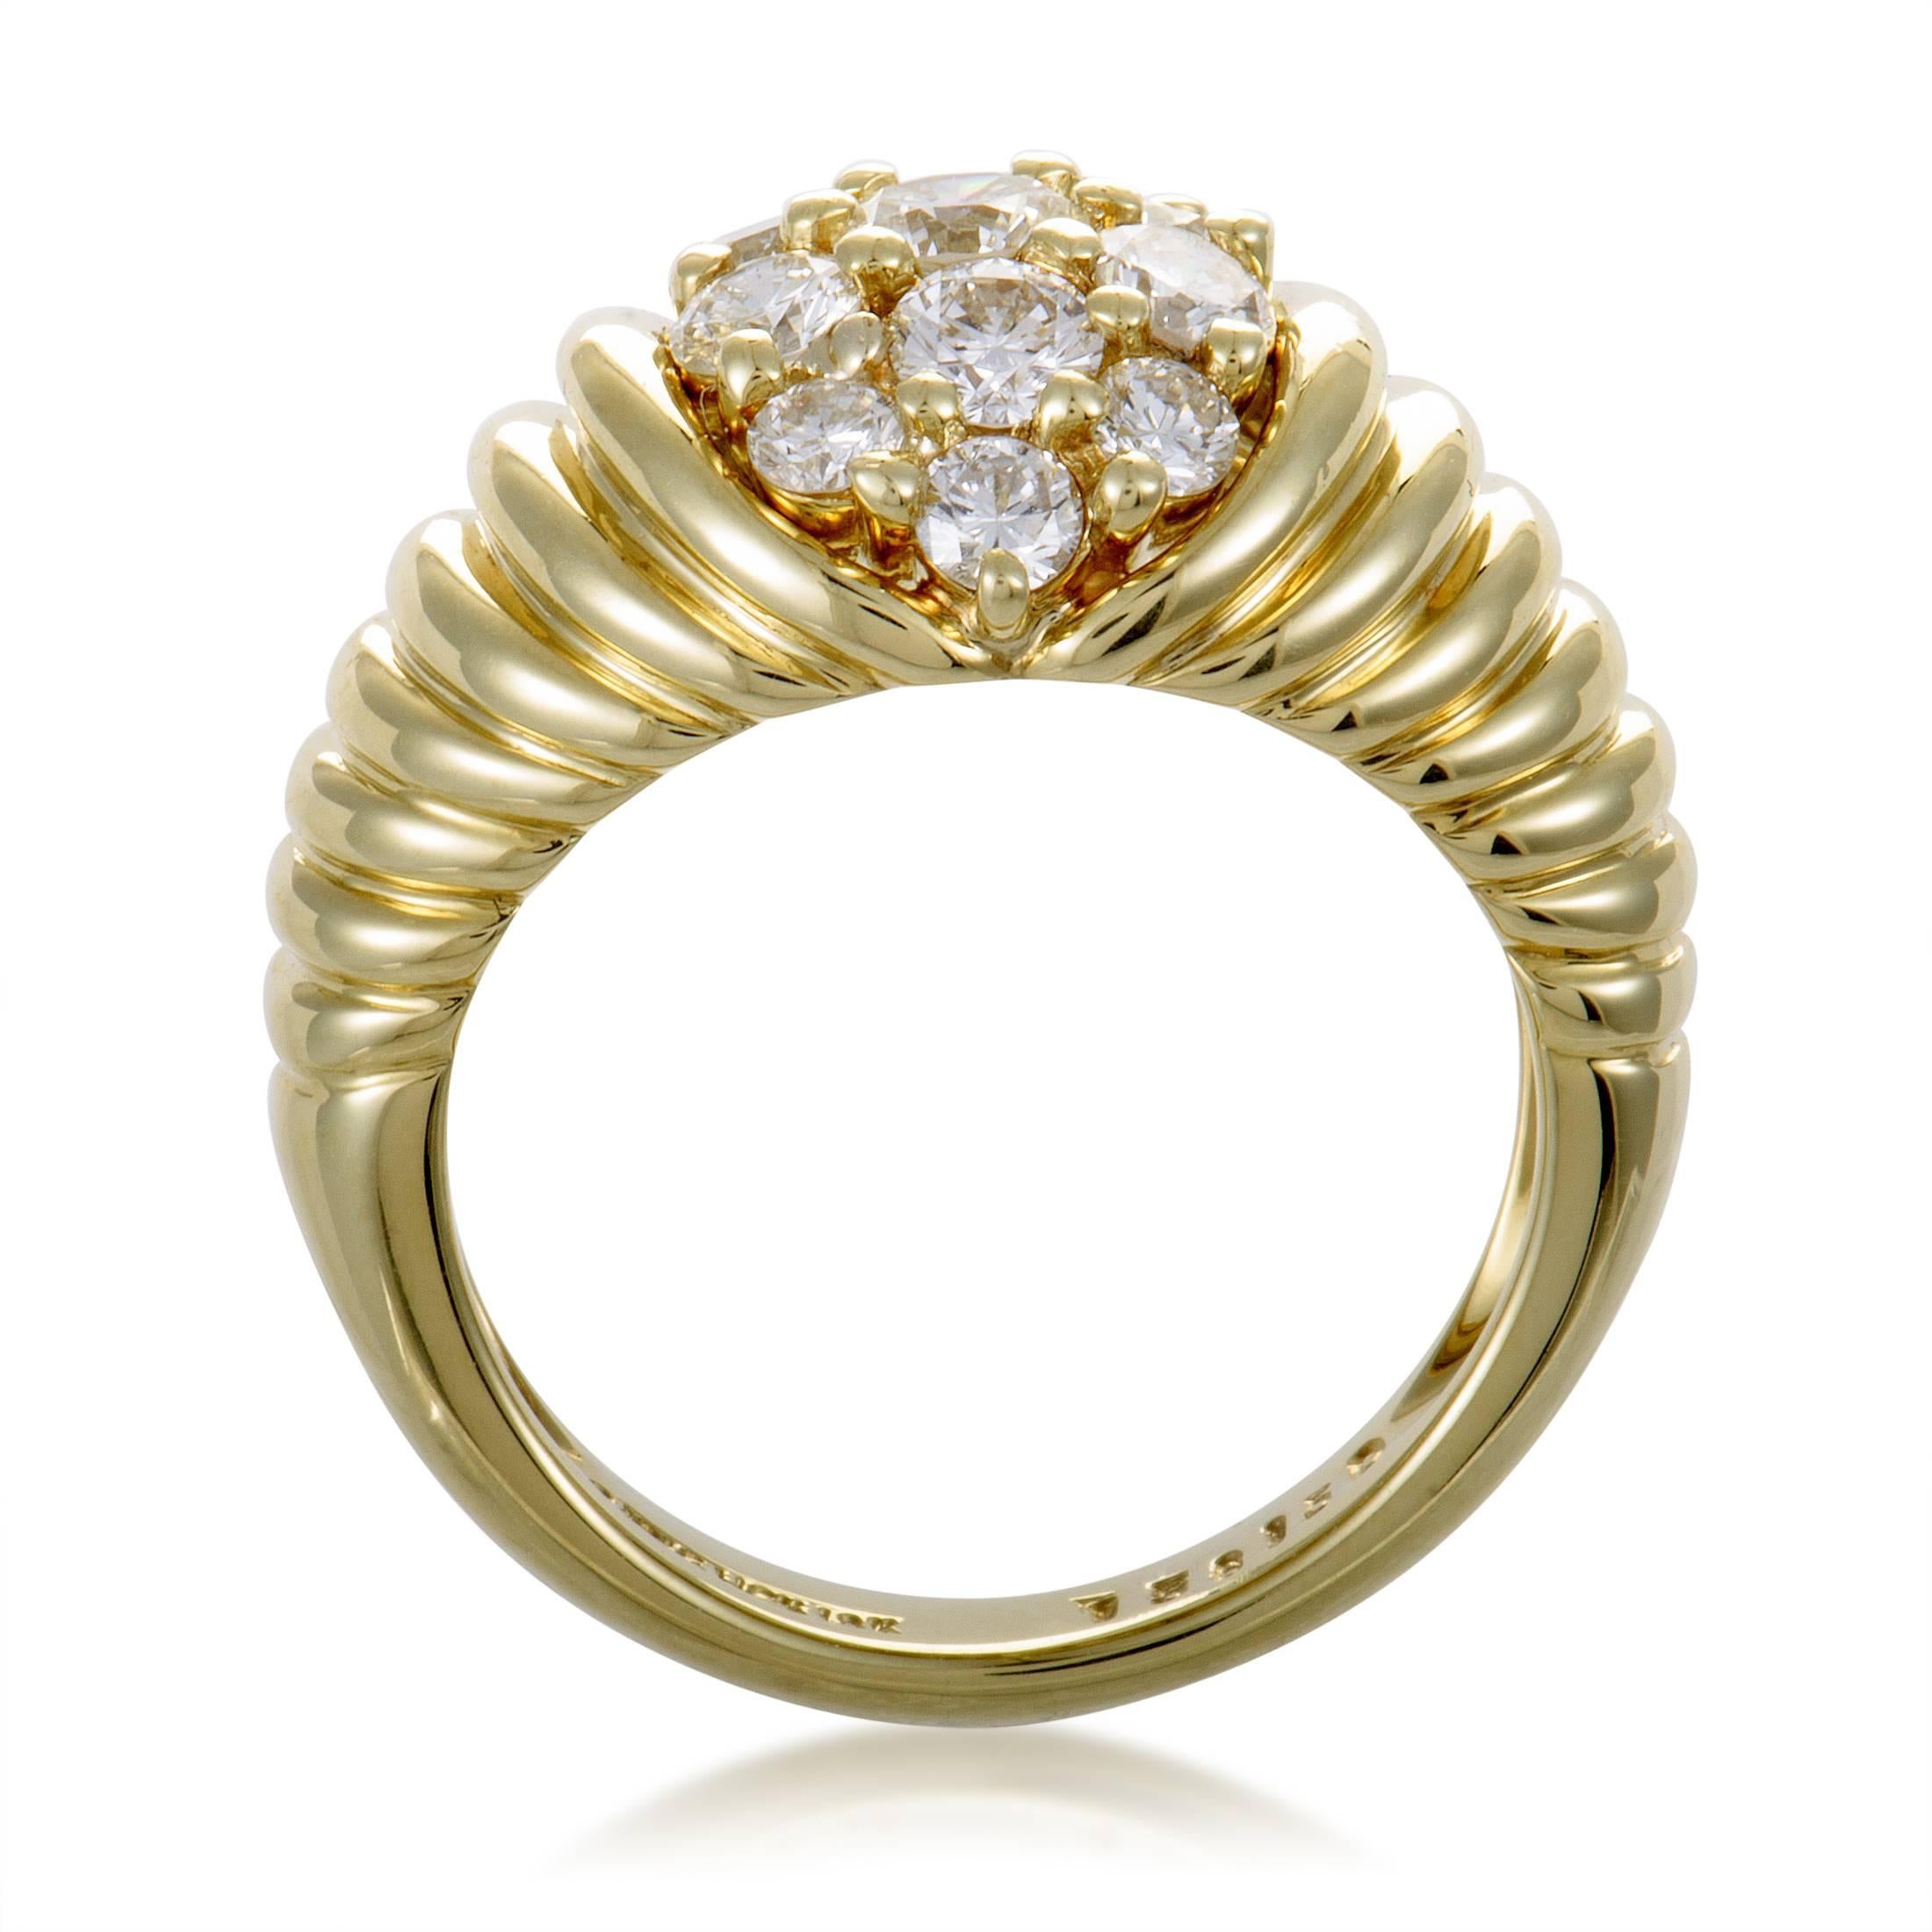 Placed upon a fantastically designed and expertly crafted body of precious 18K yellow gold, lustrous diamonds amounting to 1.35 carats are arranged in a tantalizing manner in this lavish ring from Jose Hess that exudes an aura of luxurious